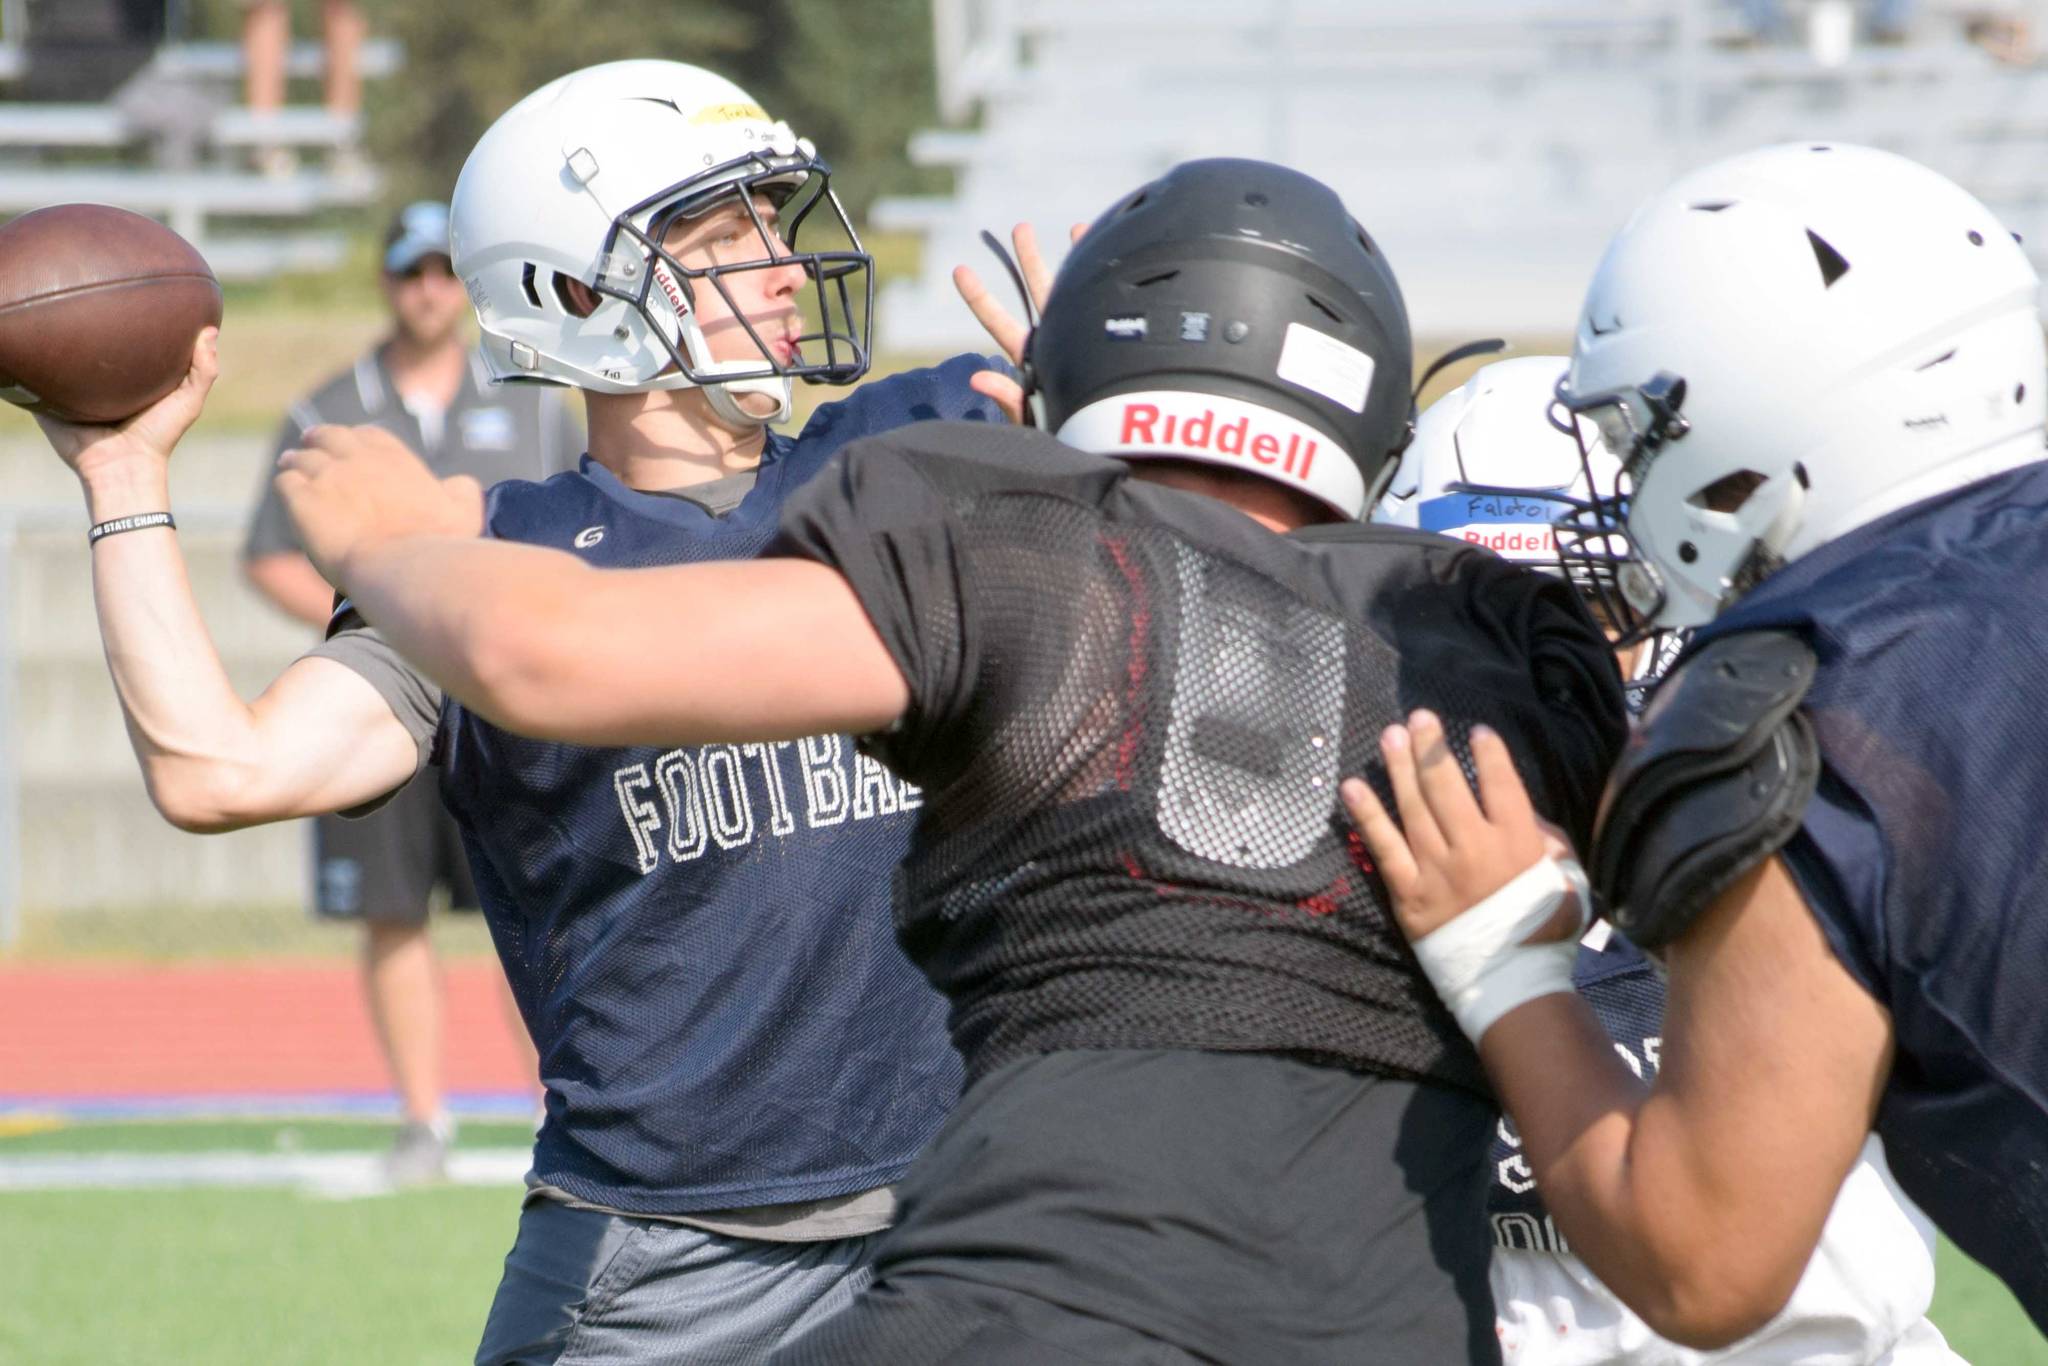 Season preview: Can SoHi reach 8 straight state crowns?